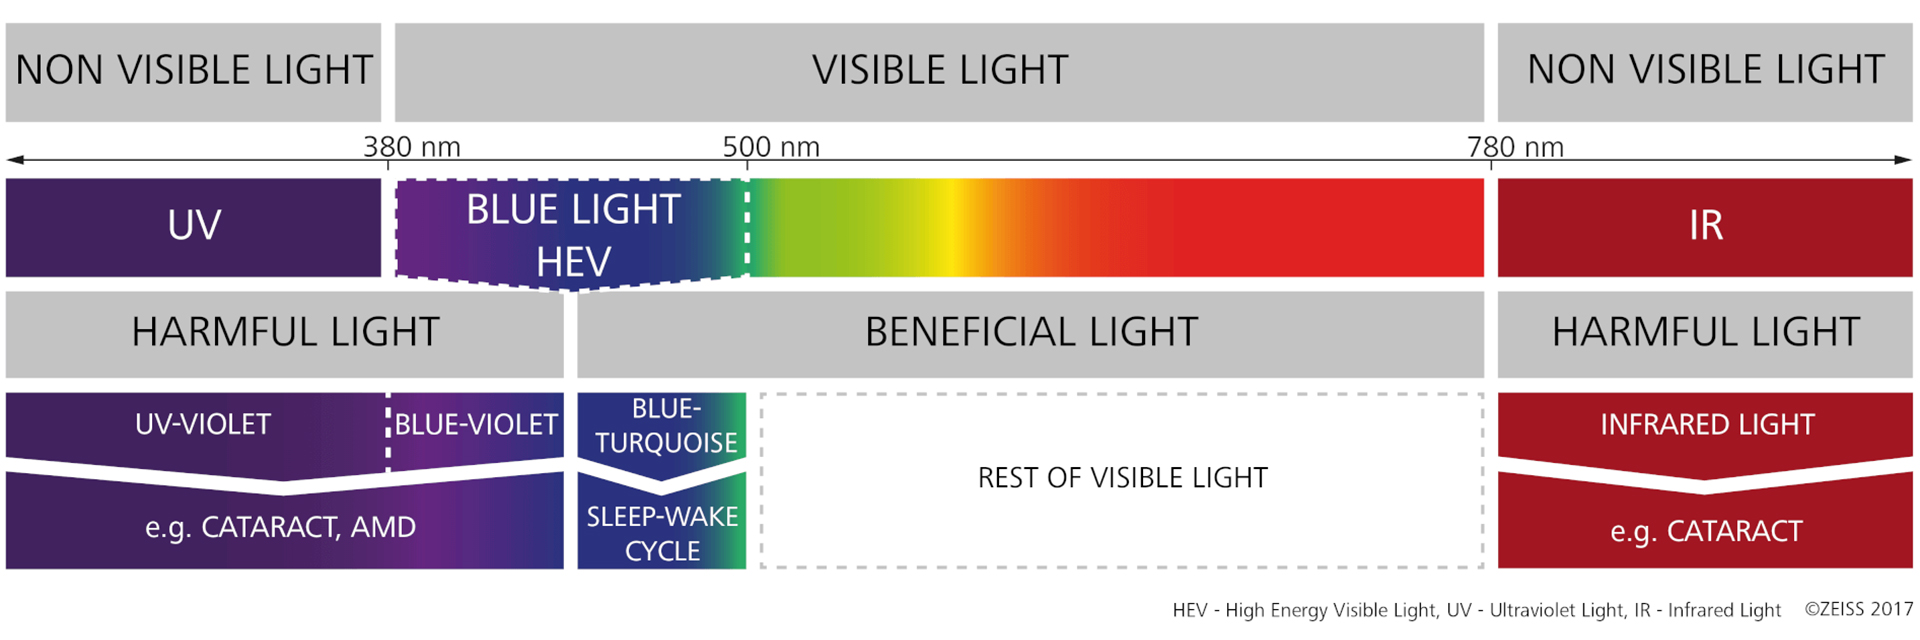 What exactly is UV light? Where does it come from?